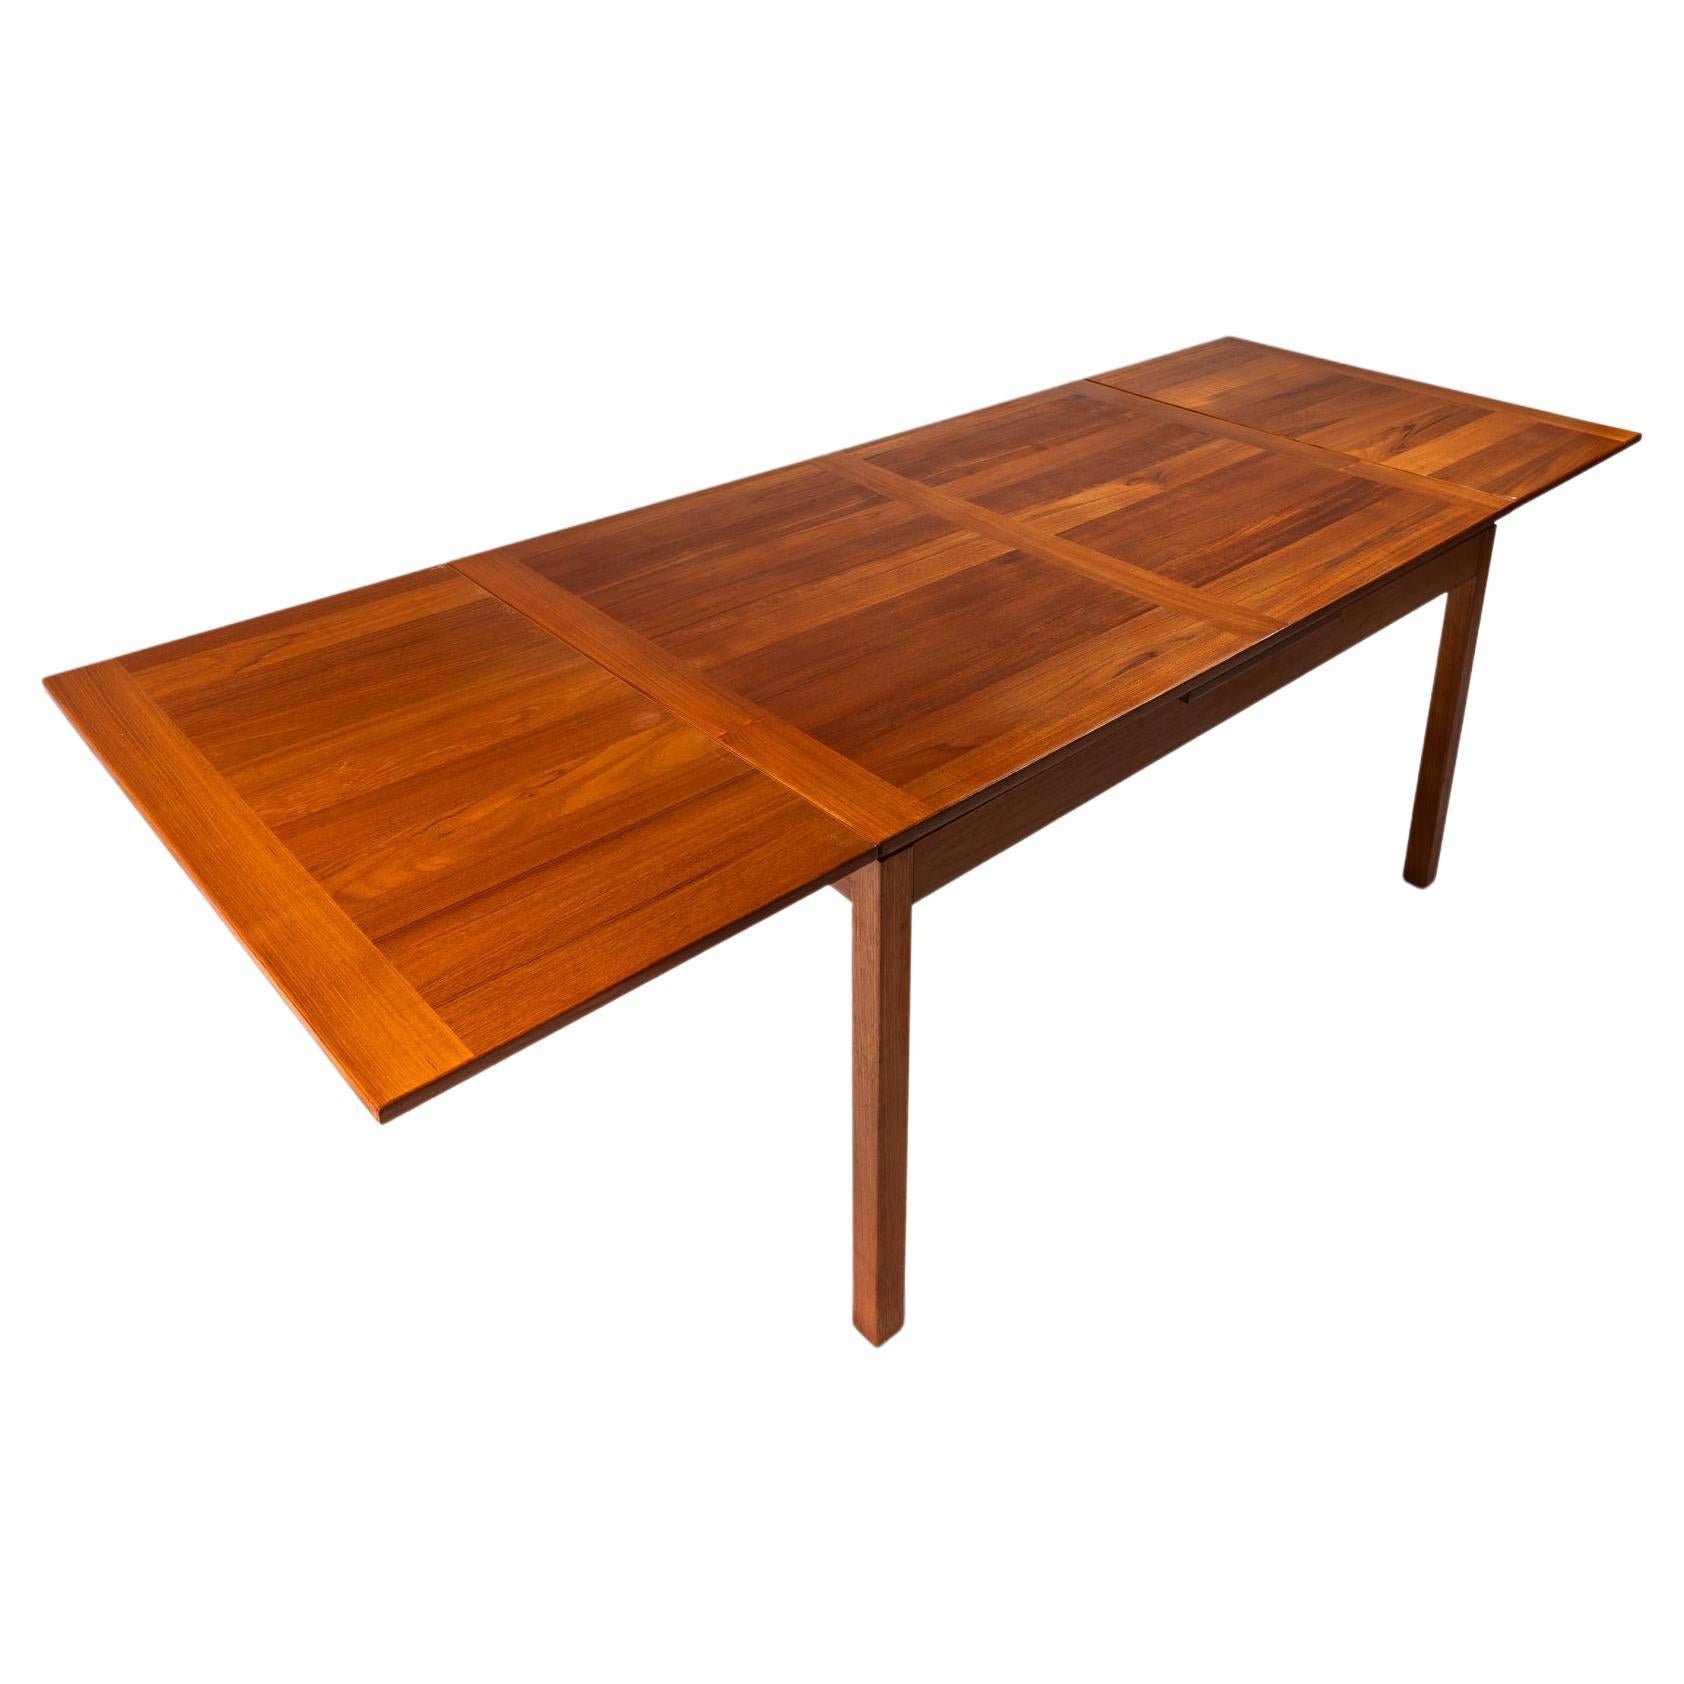 Danish Teak Extension Dining Table with Stow-in-Table Leaves, Denmark, c. 1970s